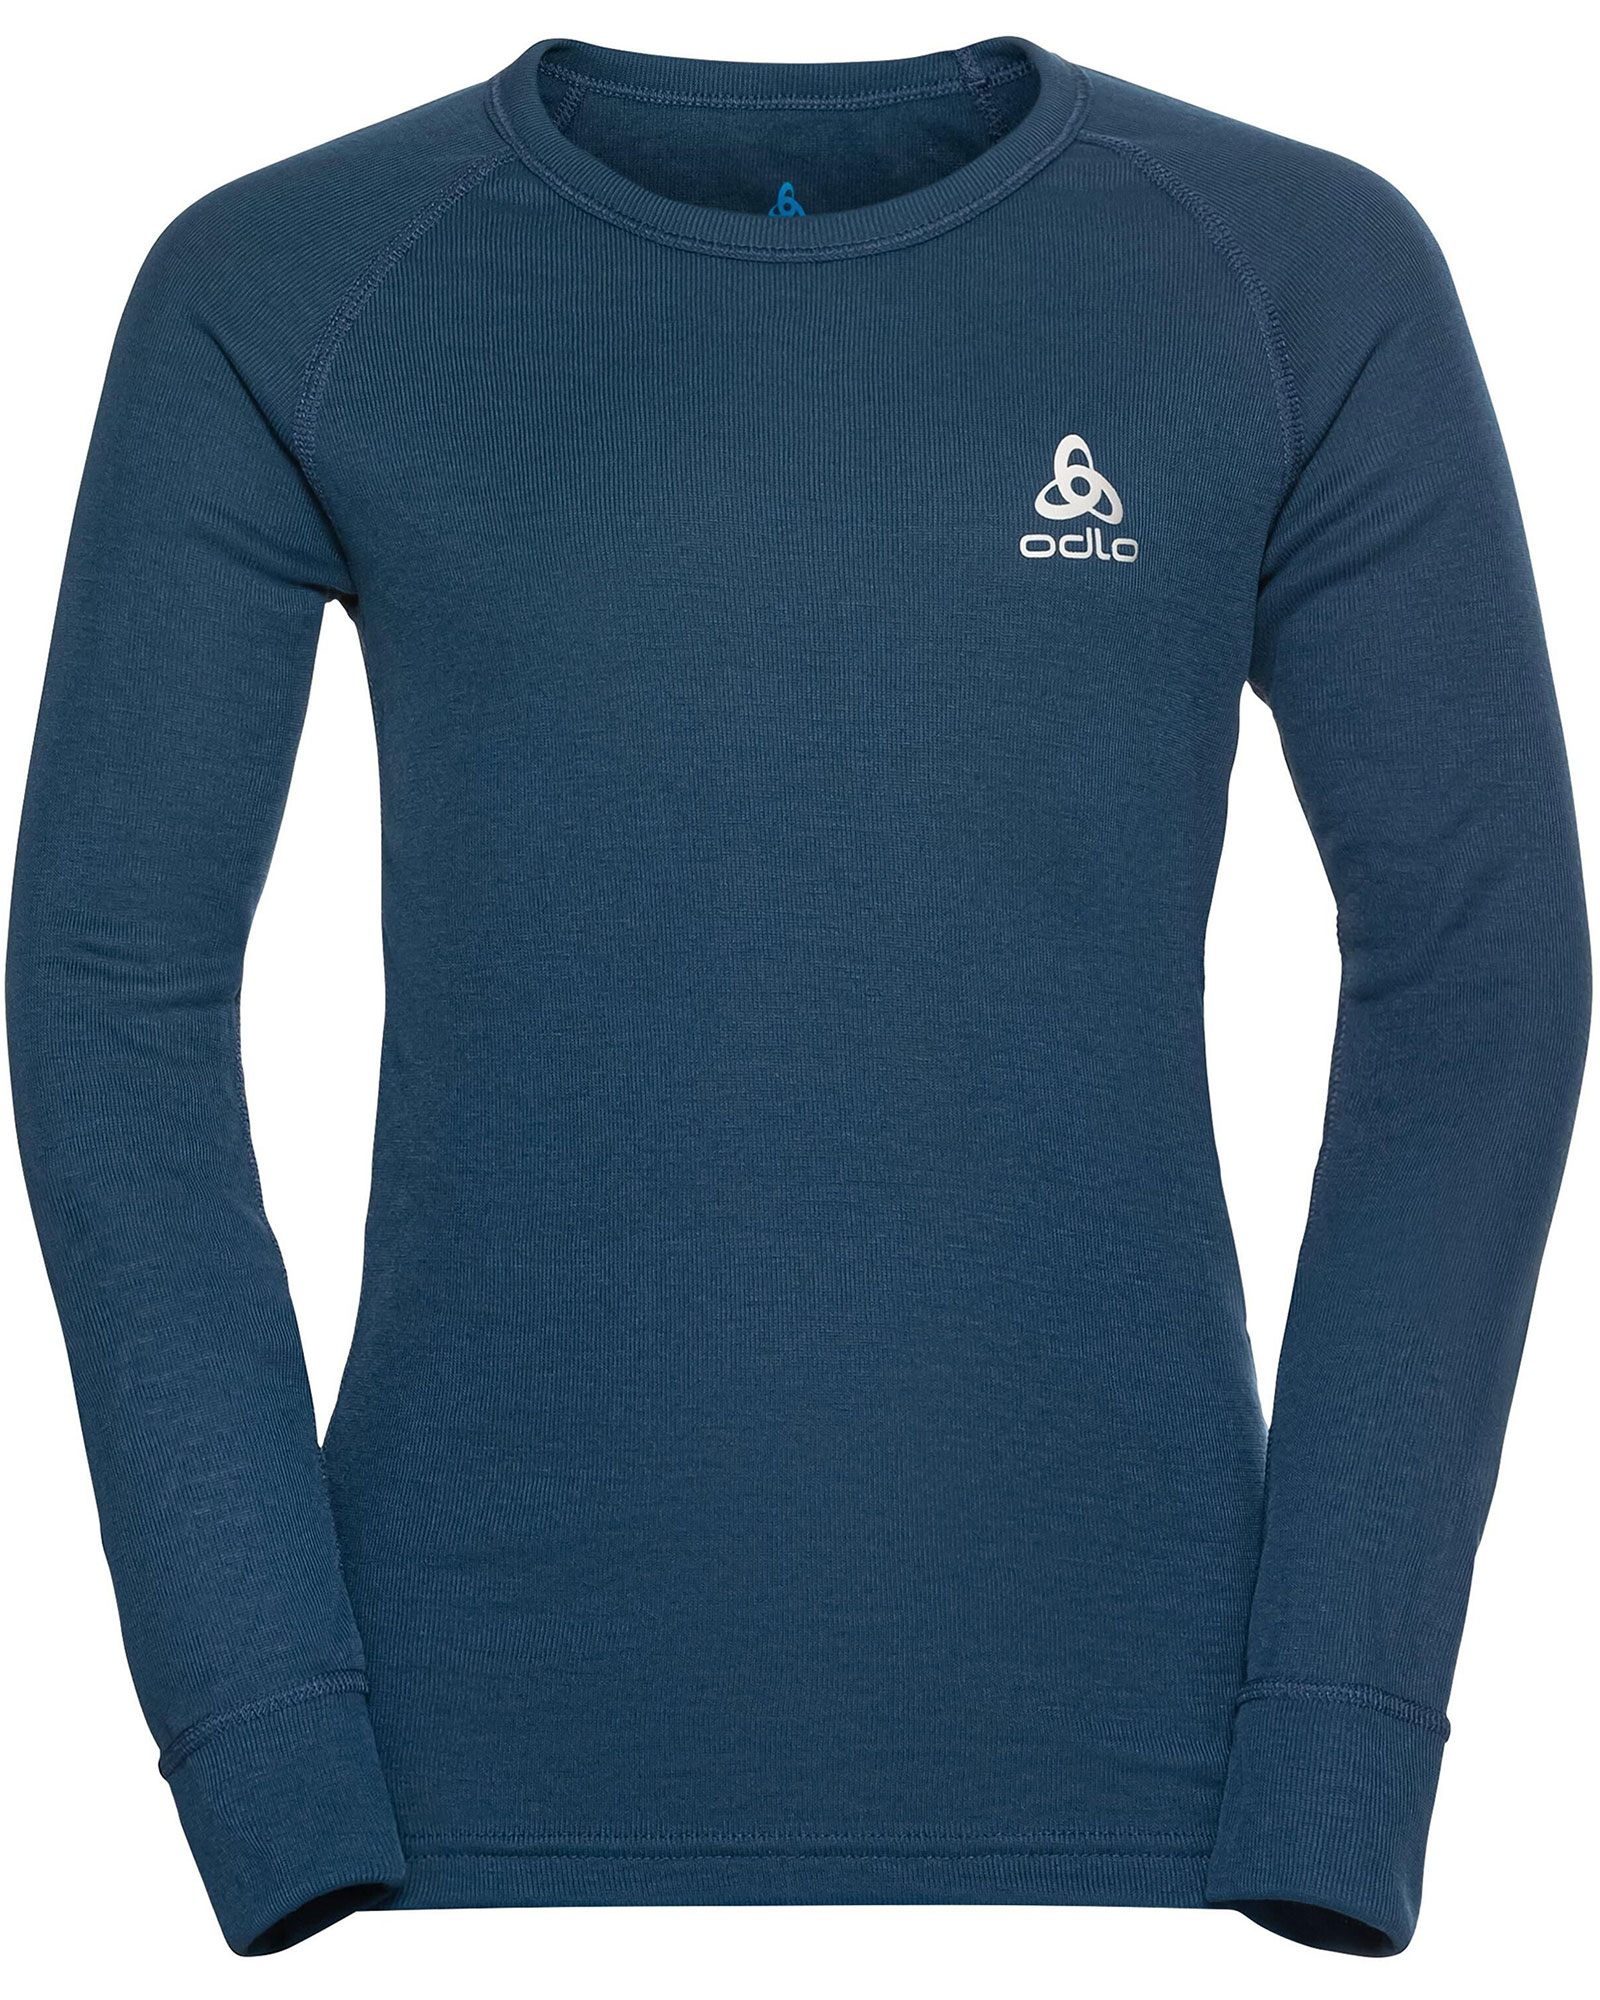 Odlo Active Warm Eco BL Kids’ Long Sleeve Crew Neck - Blue Wing Teal 14 Years